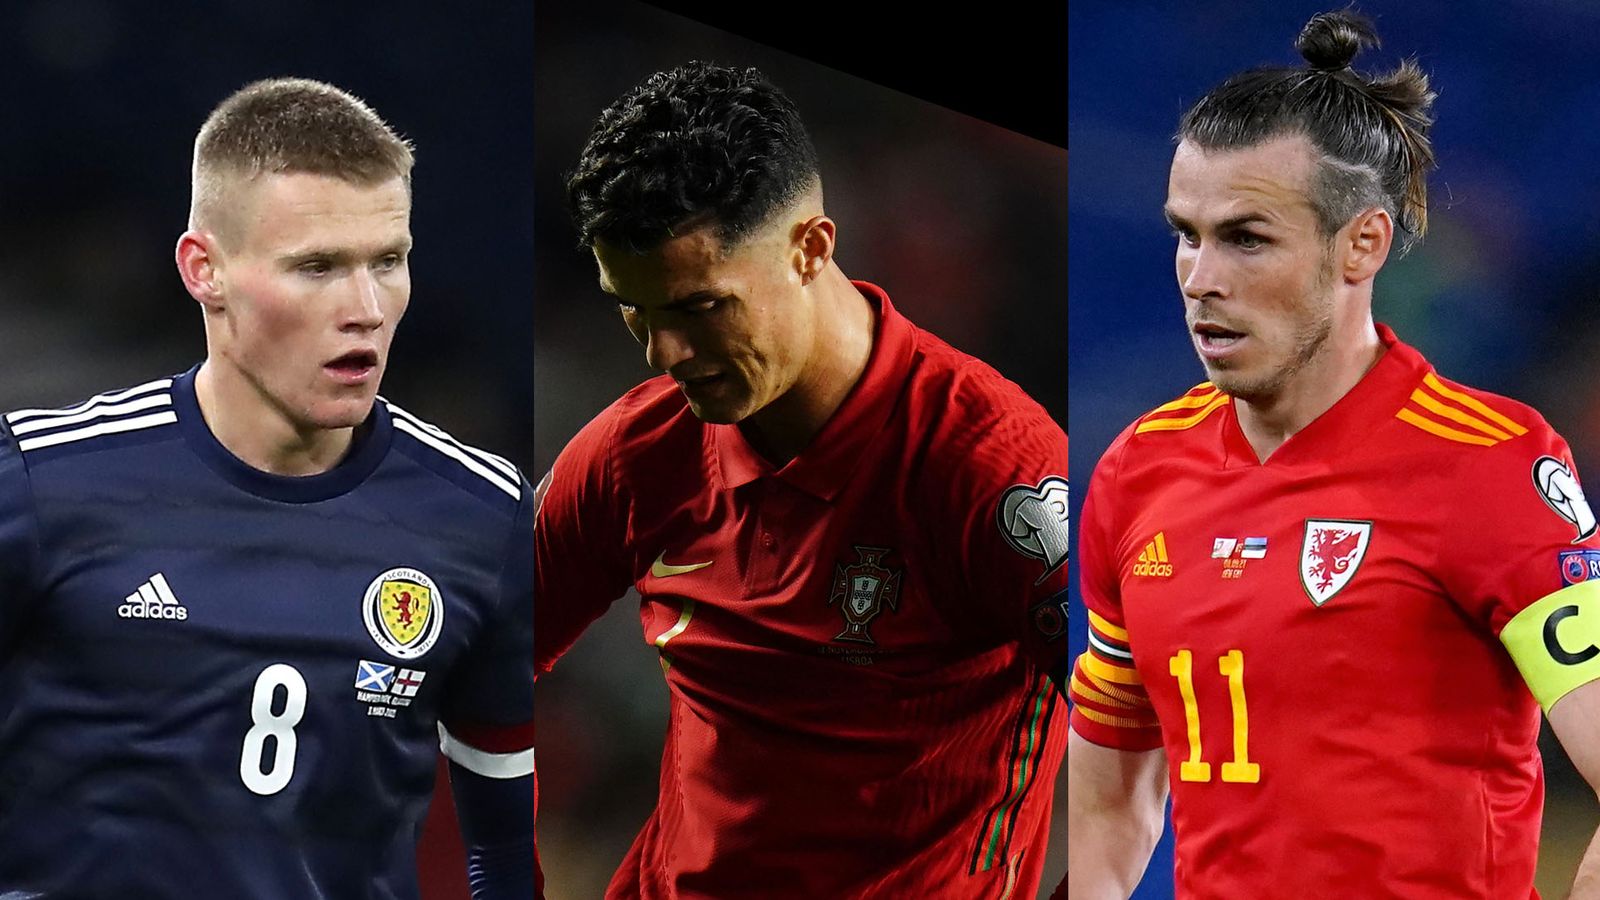 World Cup play-off draw: Scotland to play Wales for place at Qatar 2022 if both win semi-finals